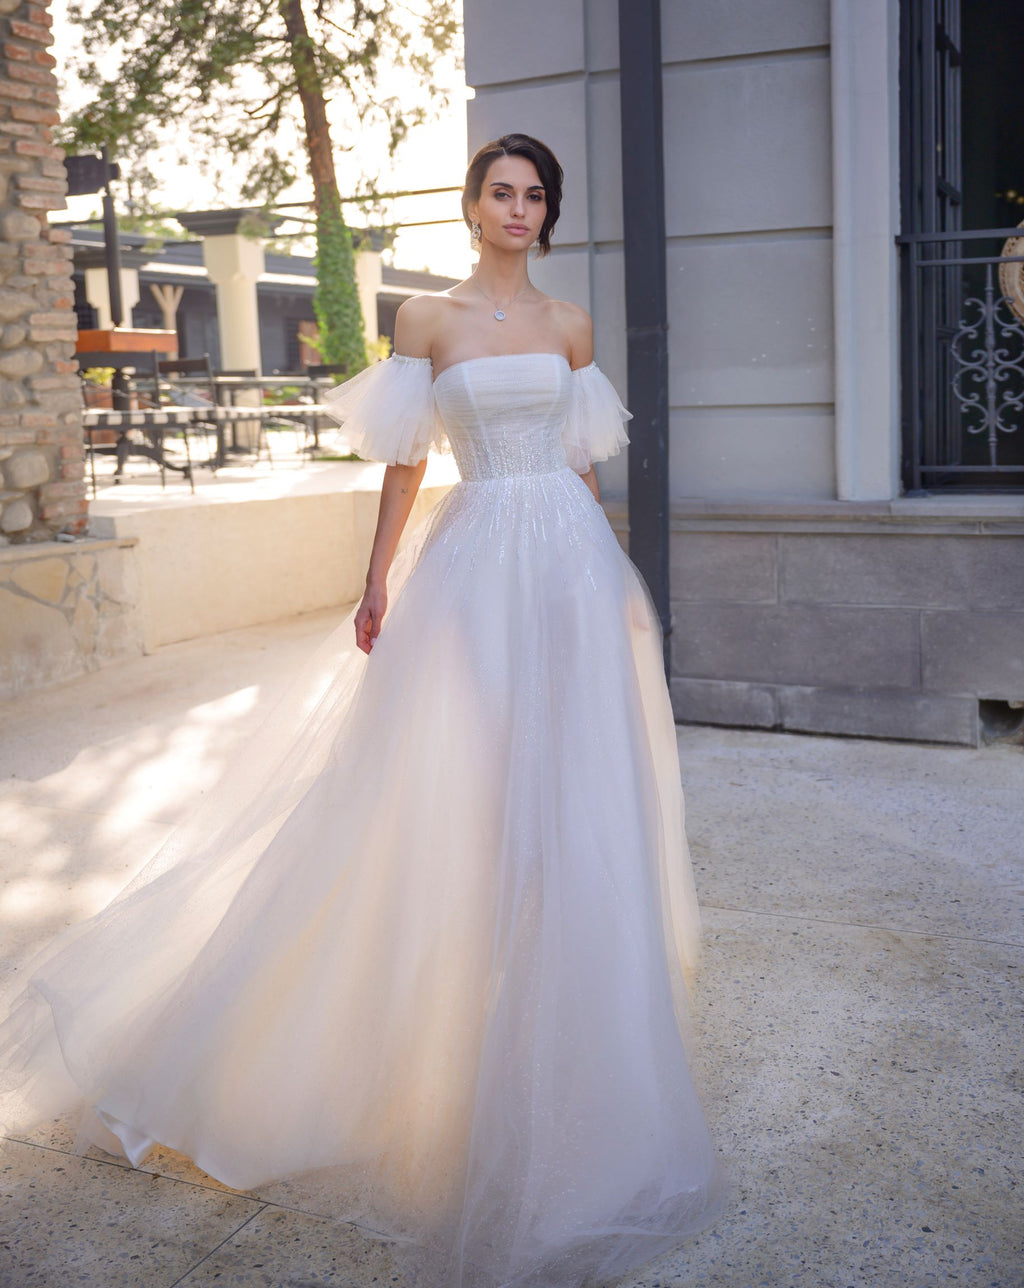 GWEN / Strapless Wedding Dress in Pushup Bustier Style Decorated